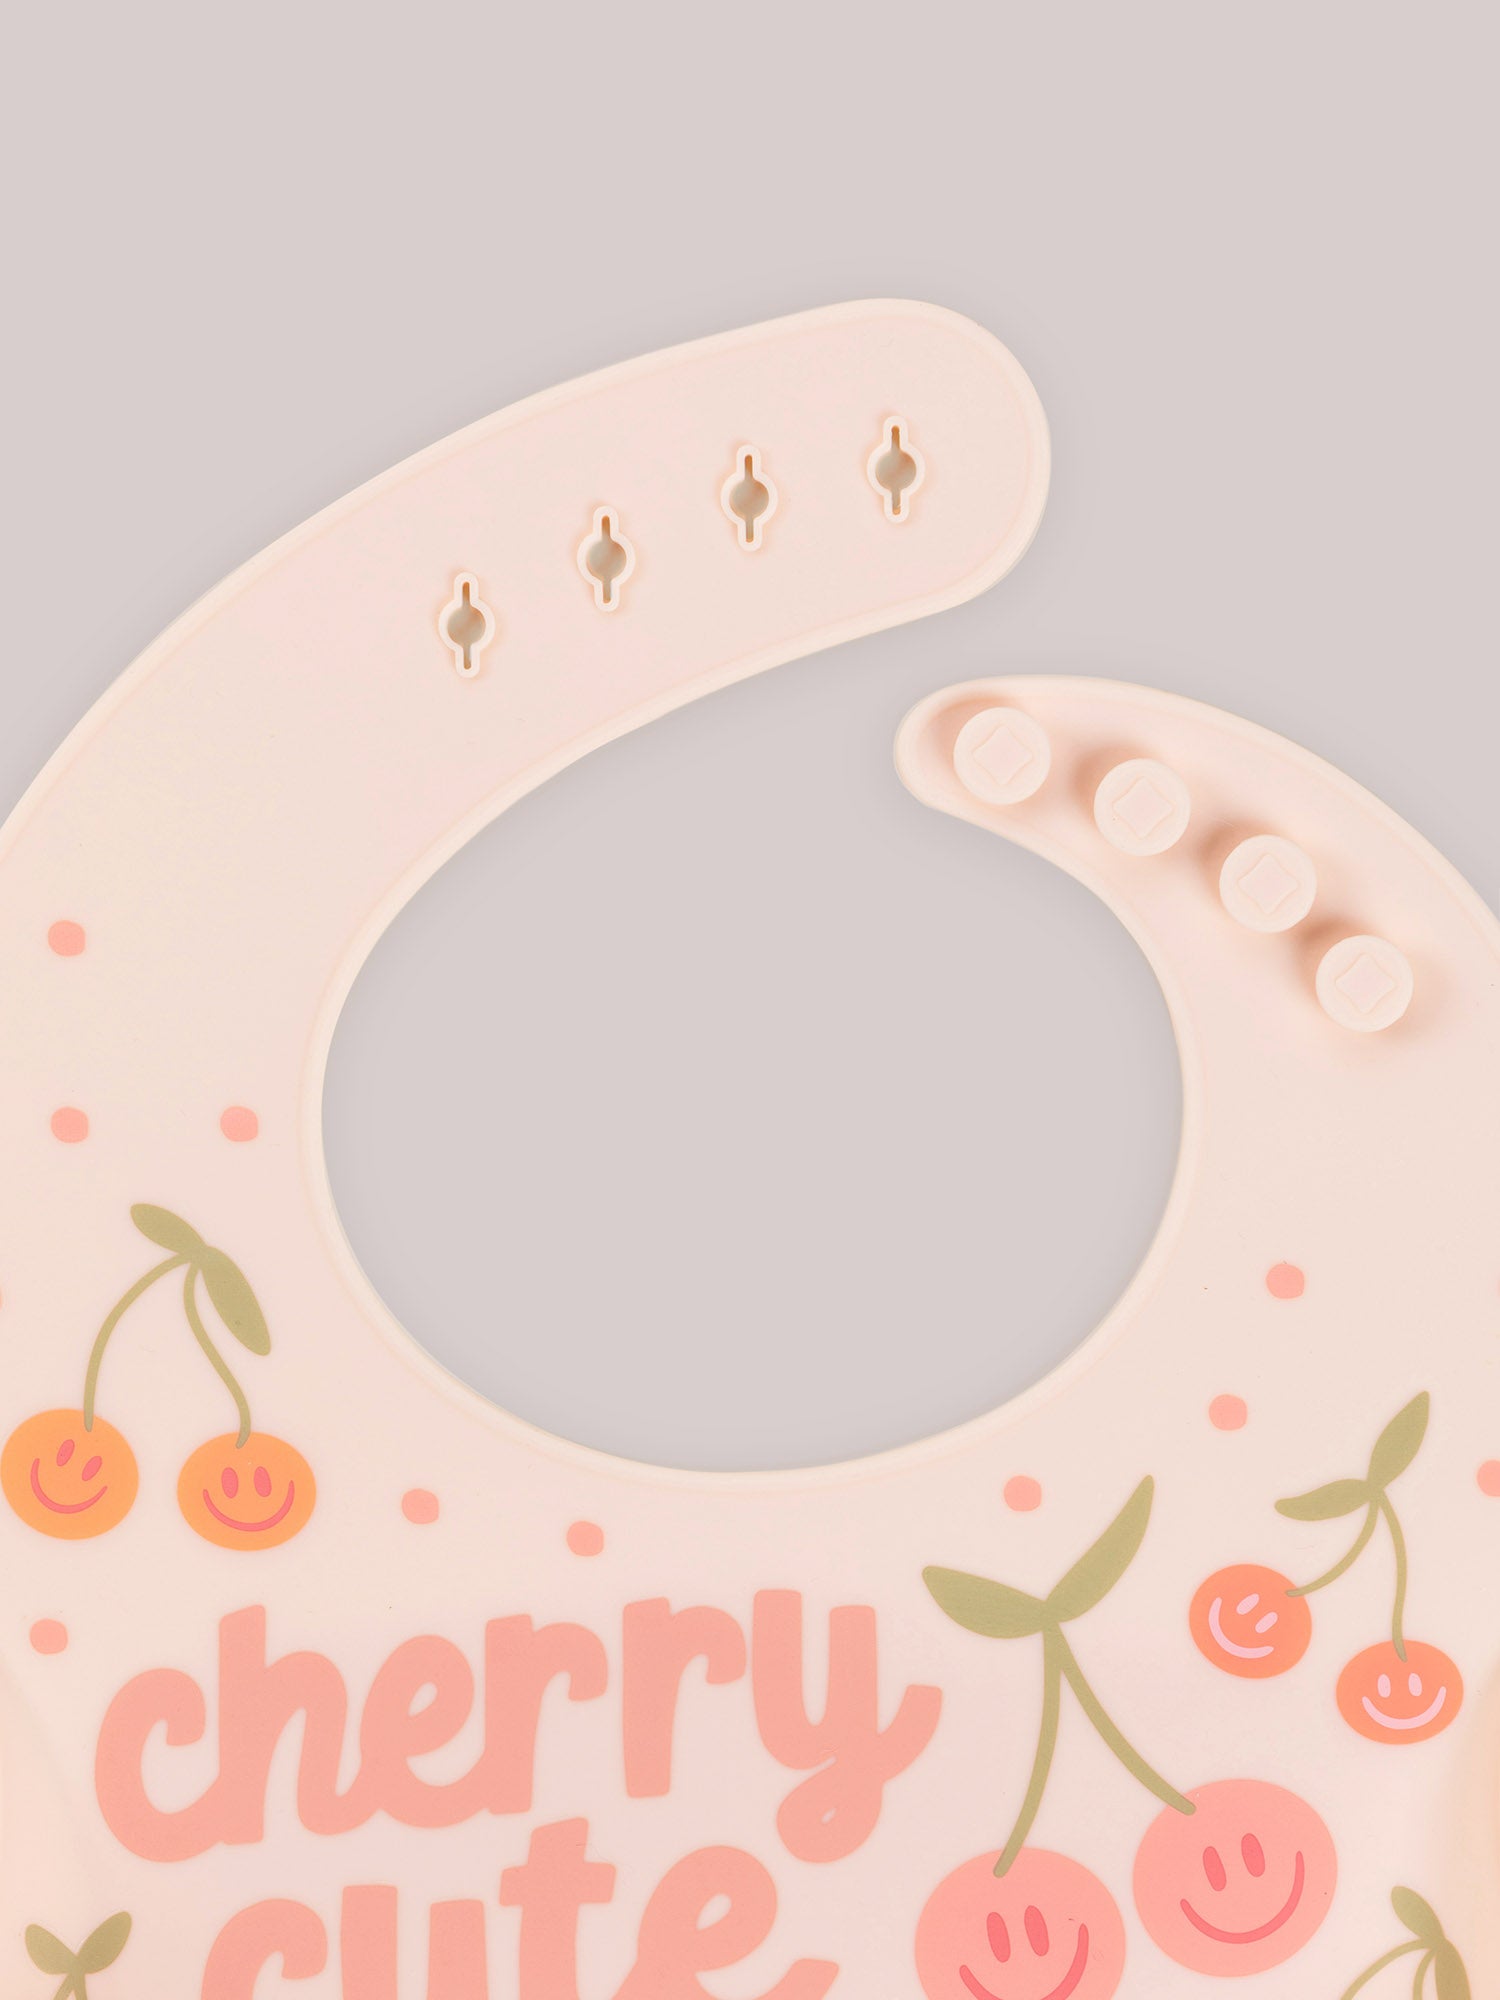 Silicone Bib - Cherry Cute by Doodle By Meg